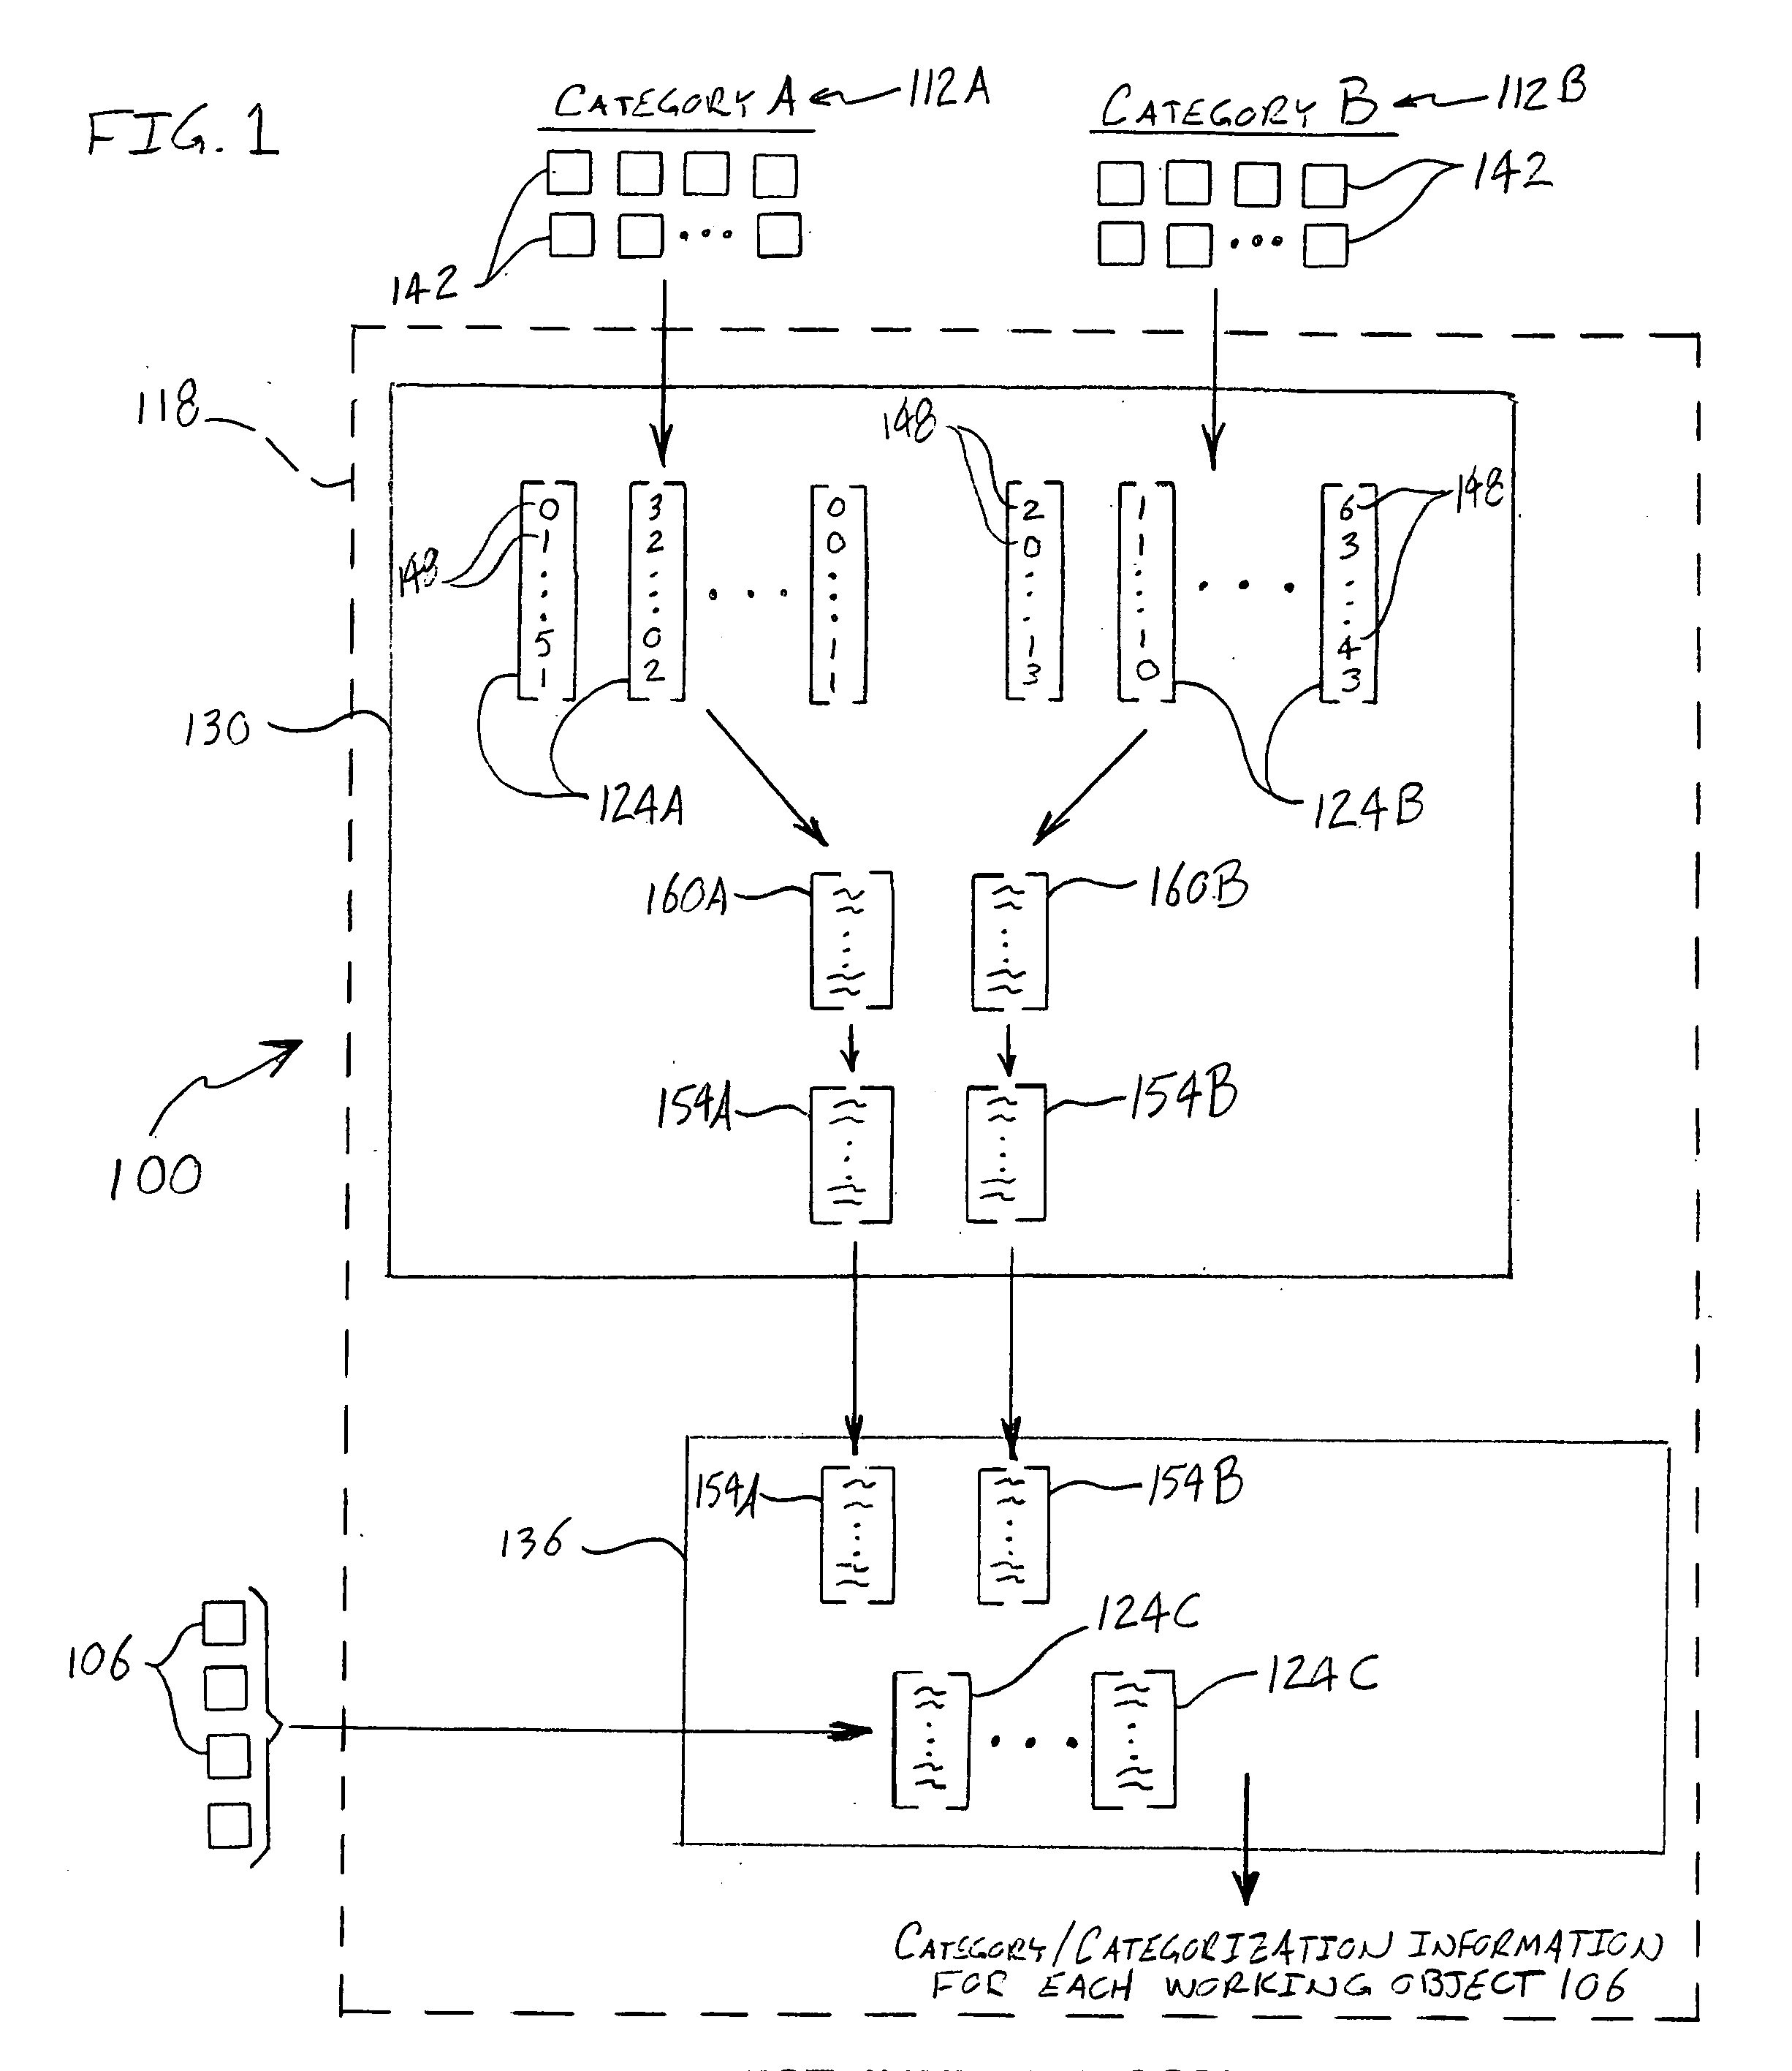 System and method for automatically categorizing objects using an empirically based goodness of fit technique